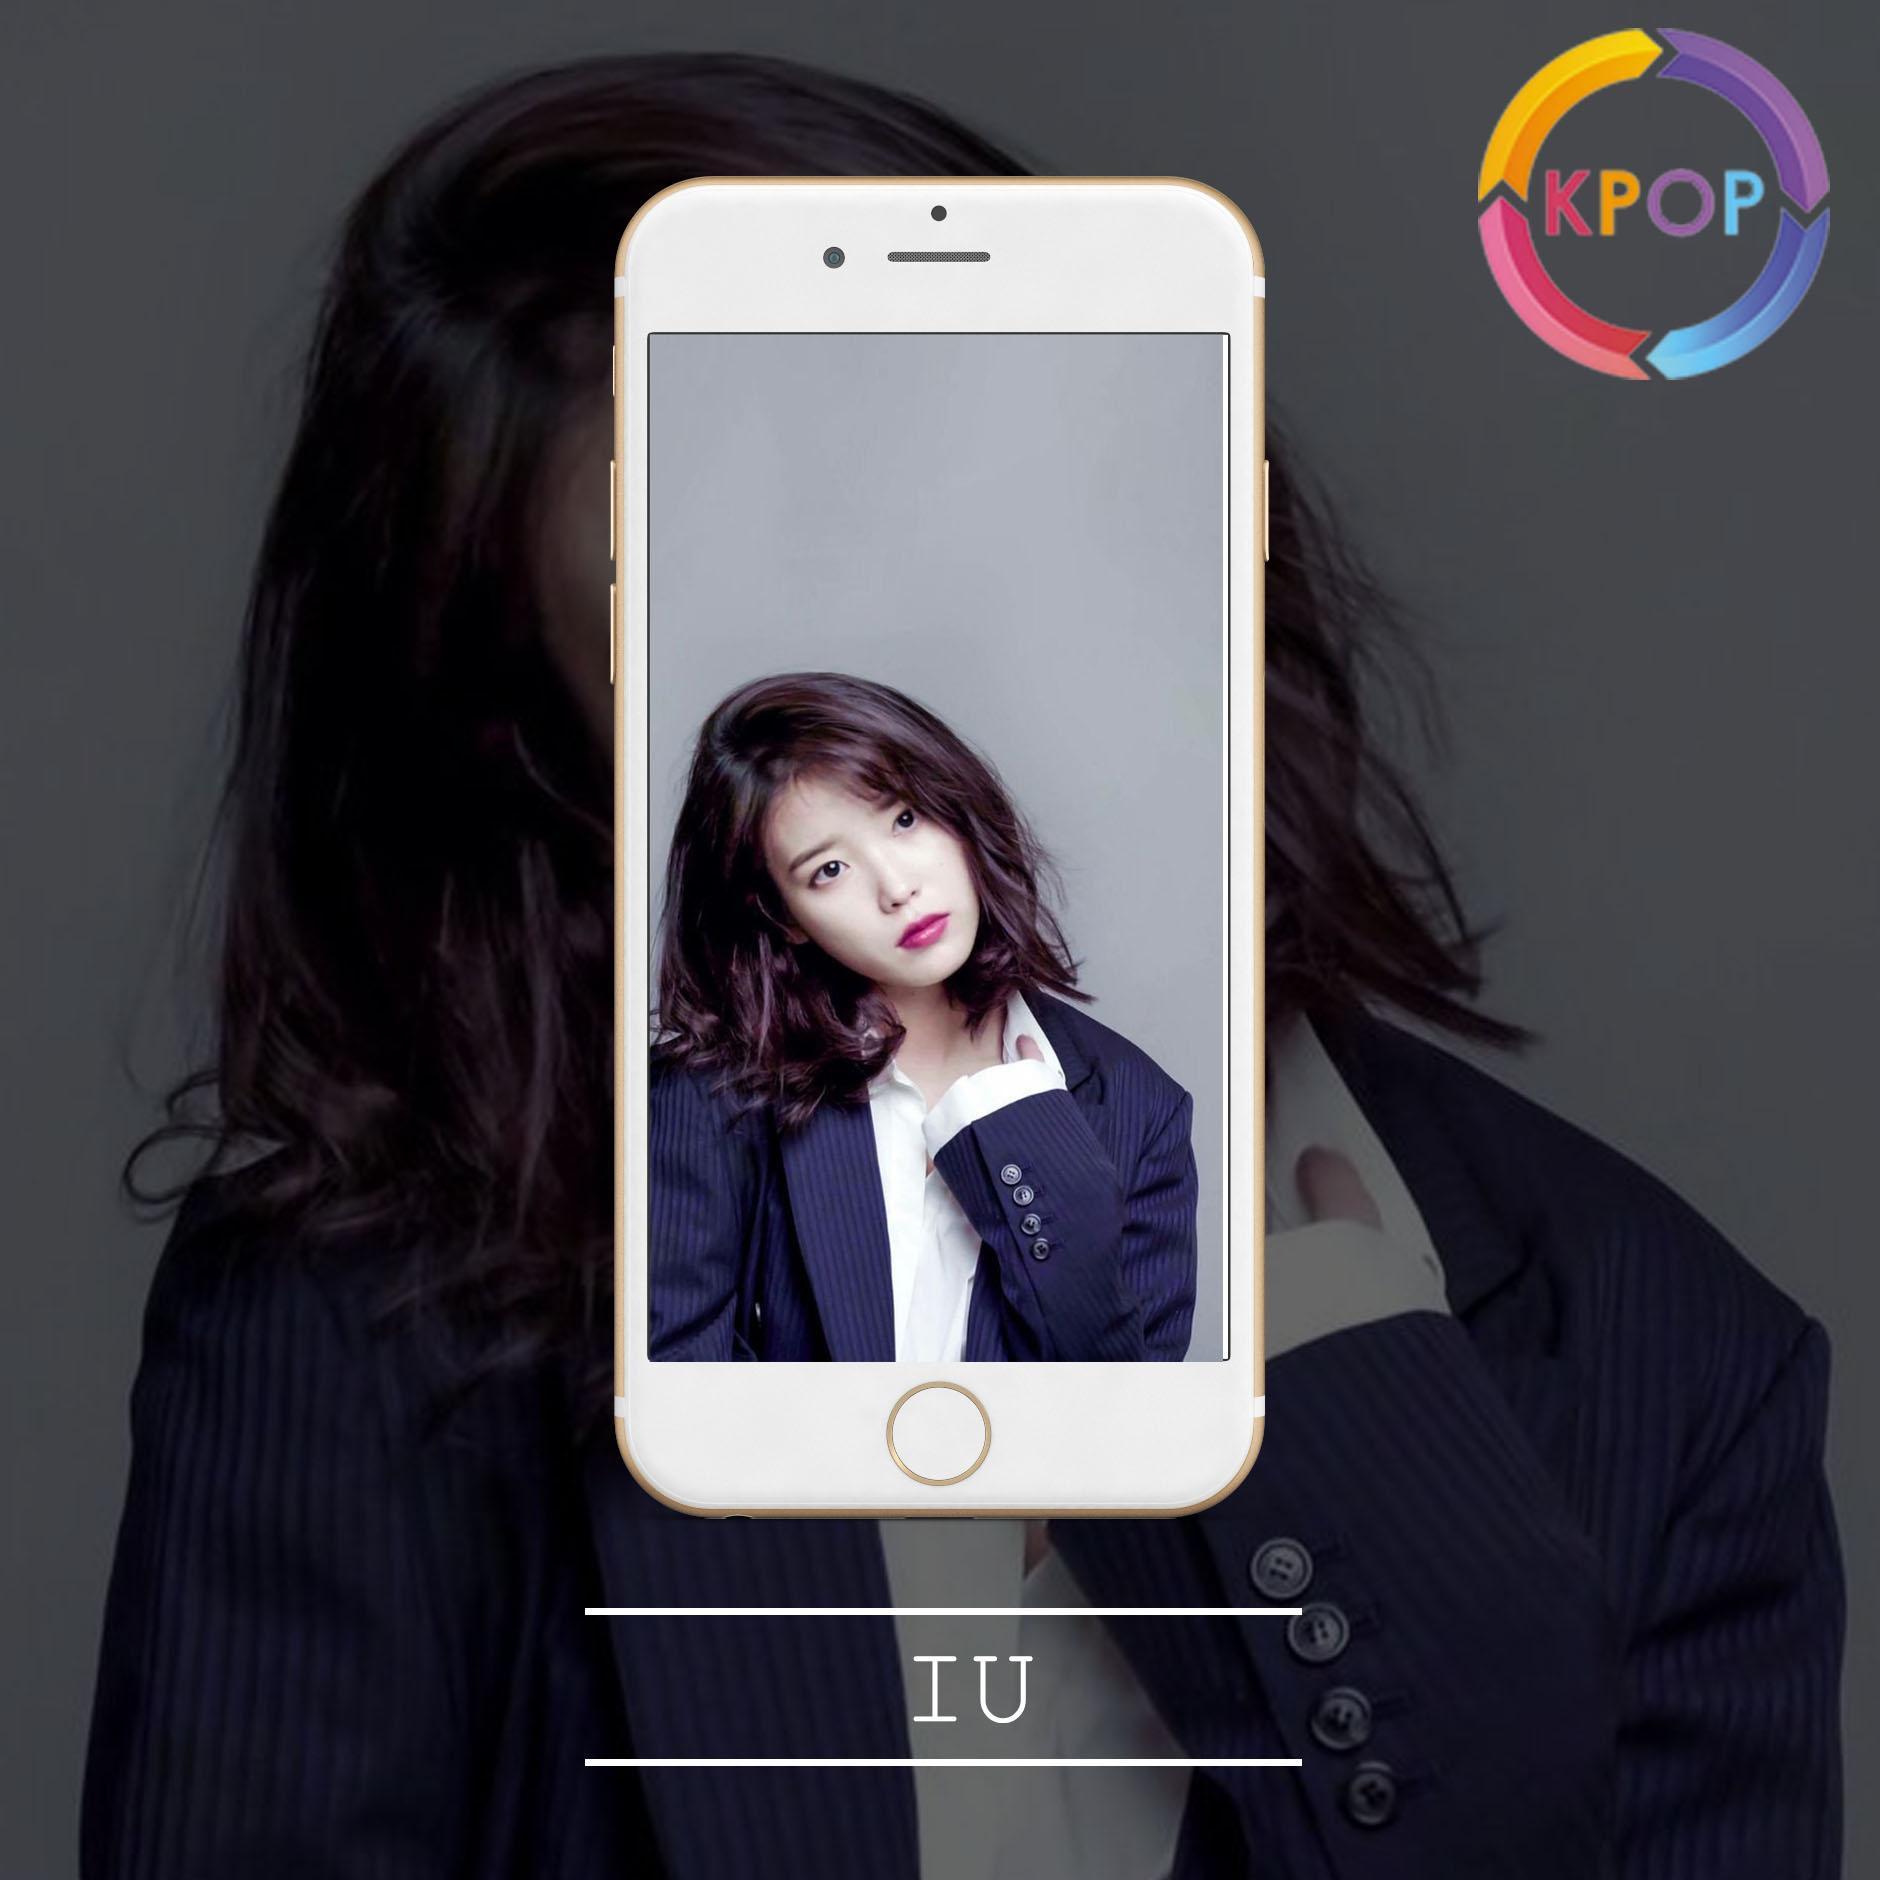 Iu Wallpaper Hd For Android Apk Download